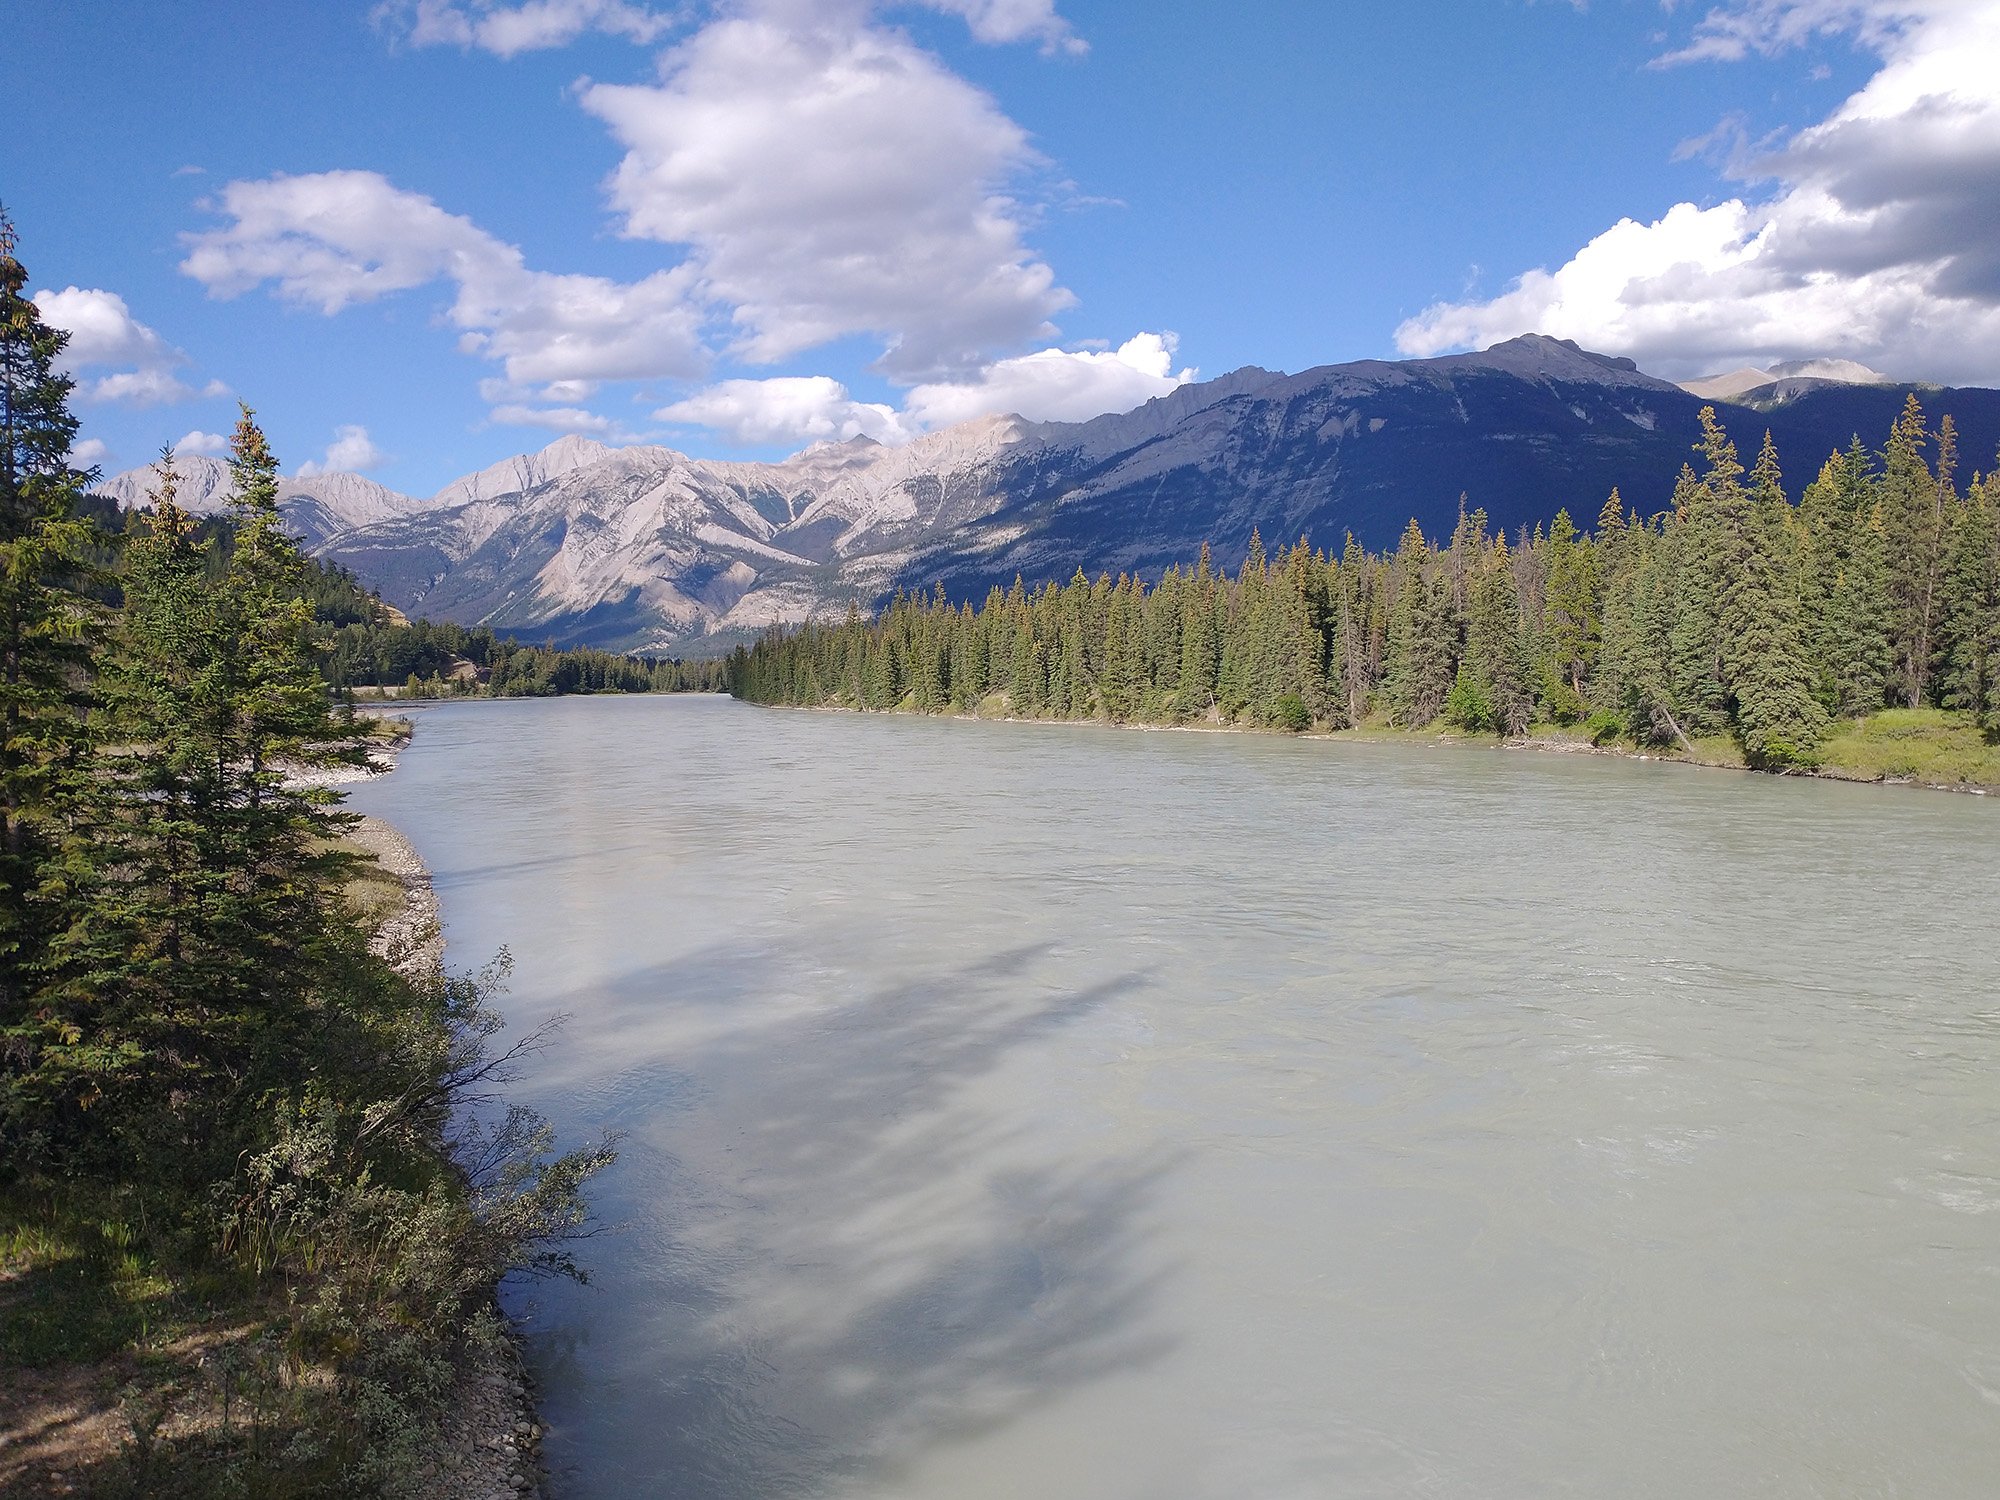 Then cross the Athabasca river, which has this blueish grey tint to it. It flows for hundreds of kms through the rockies.